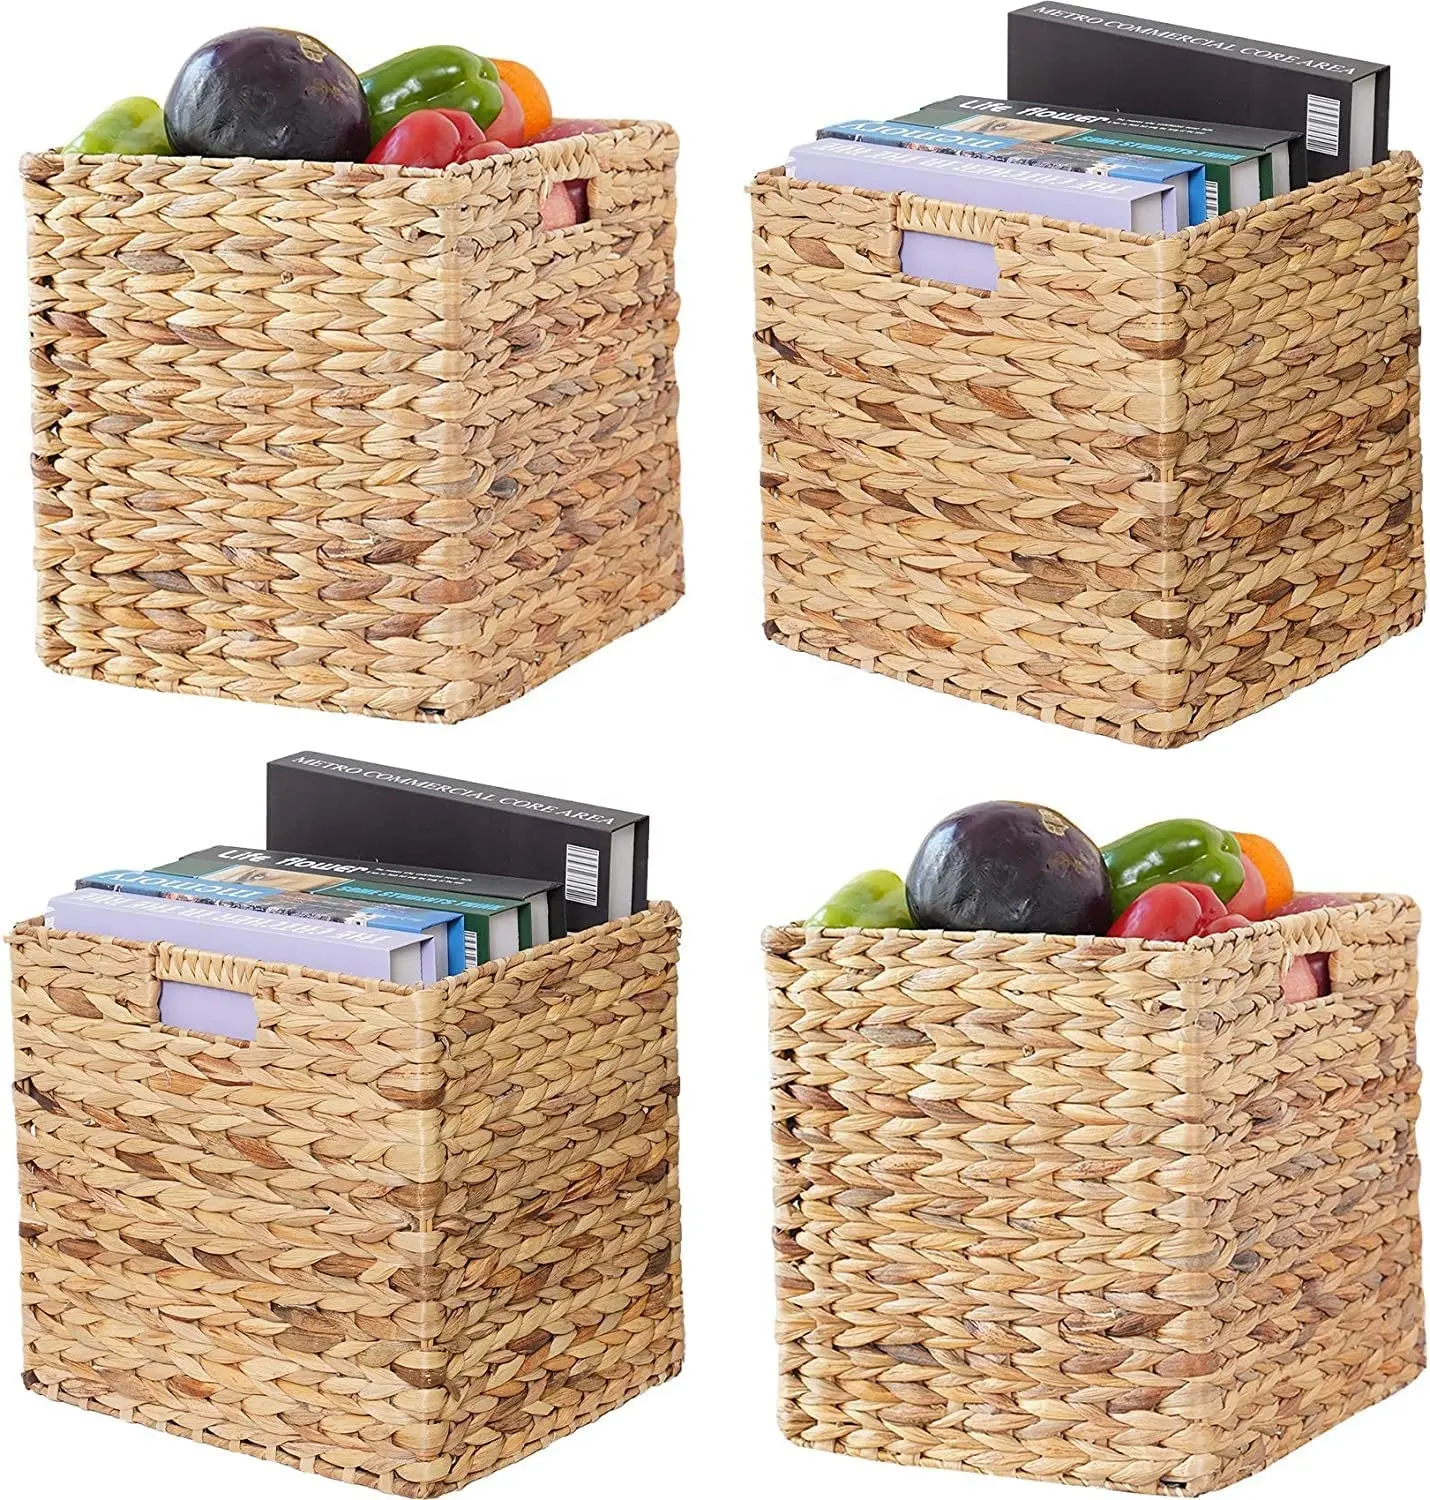 Living Foldable Handwoven Water Hyacinth Storage Baskets Laundry Organizer Totes for Bedroom, Living Room